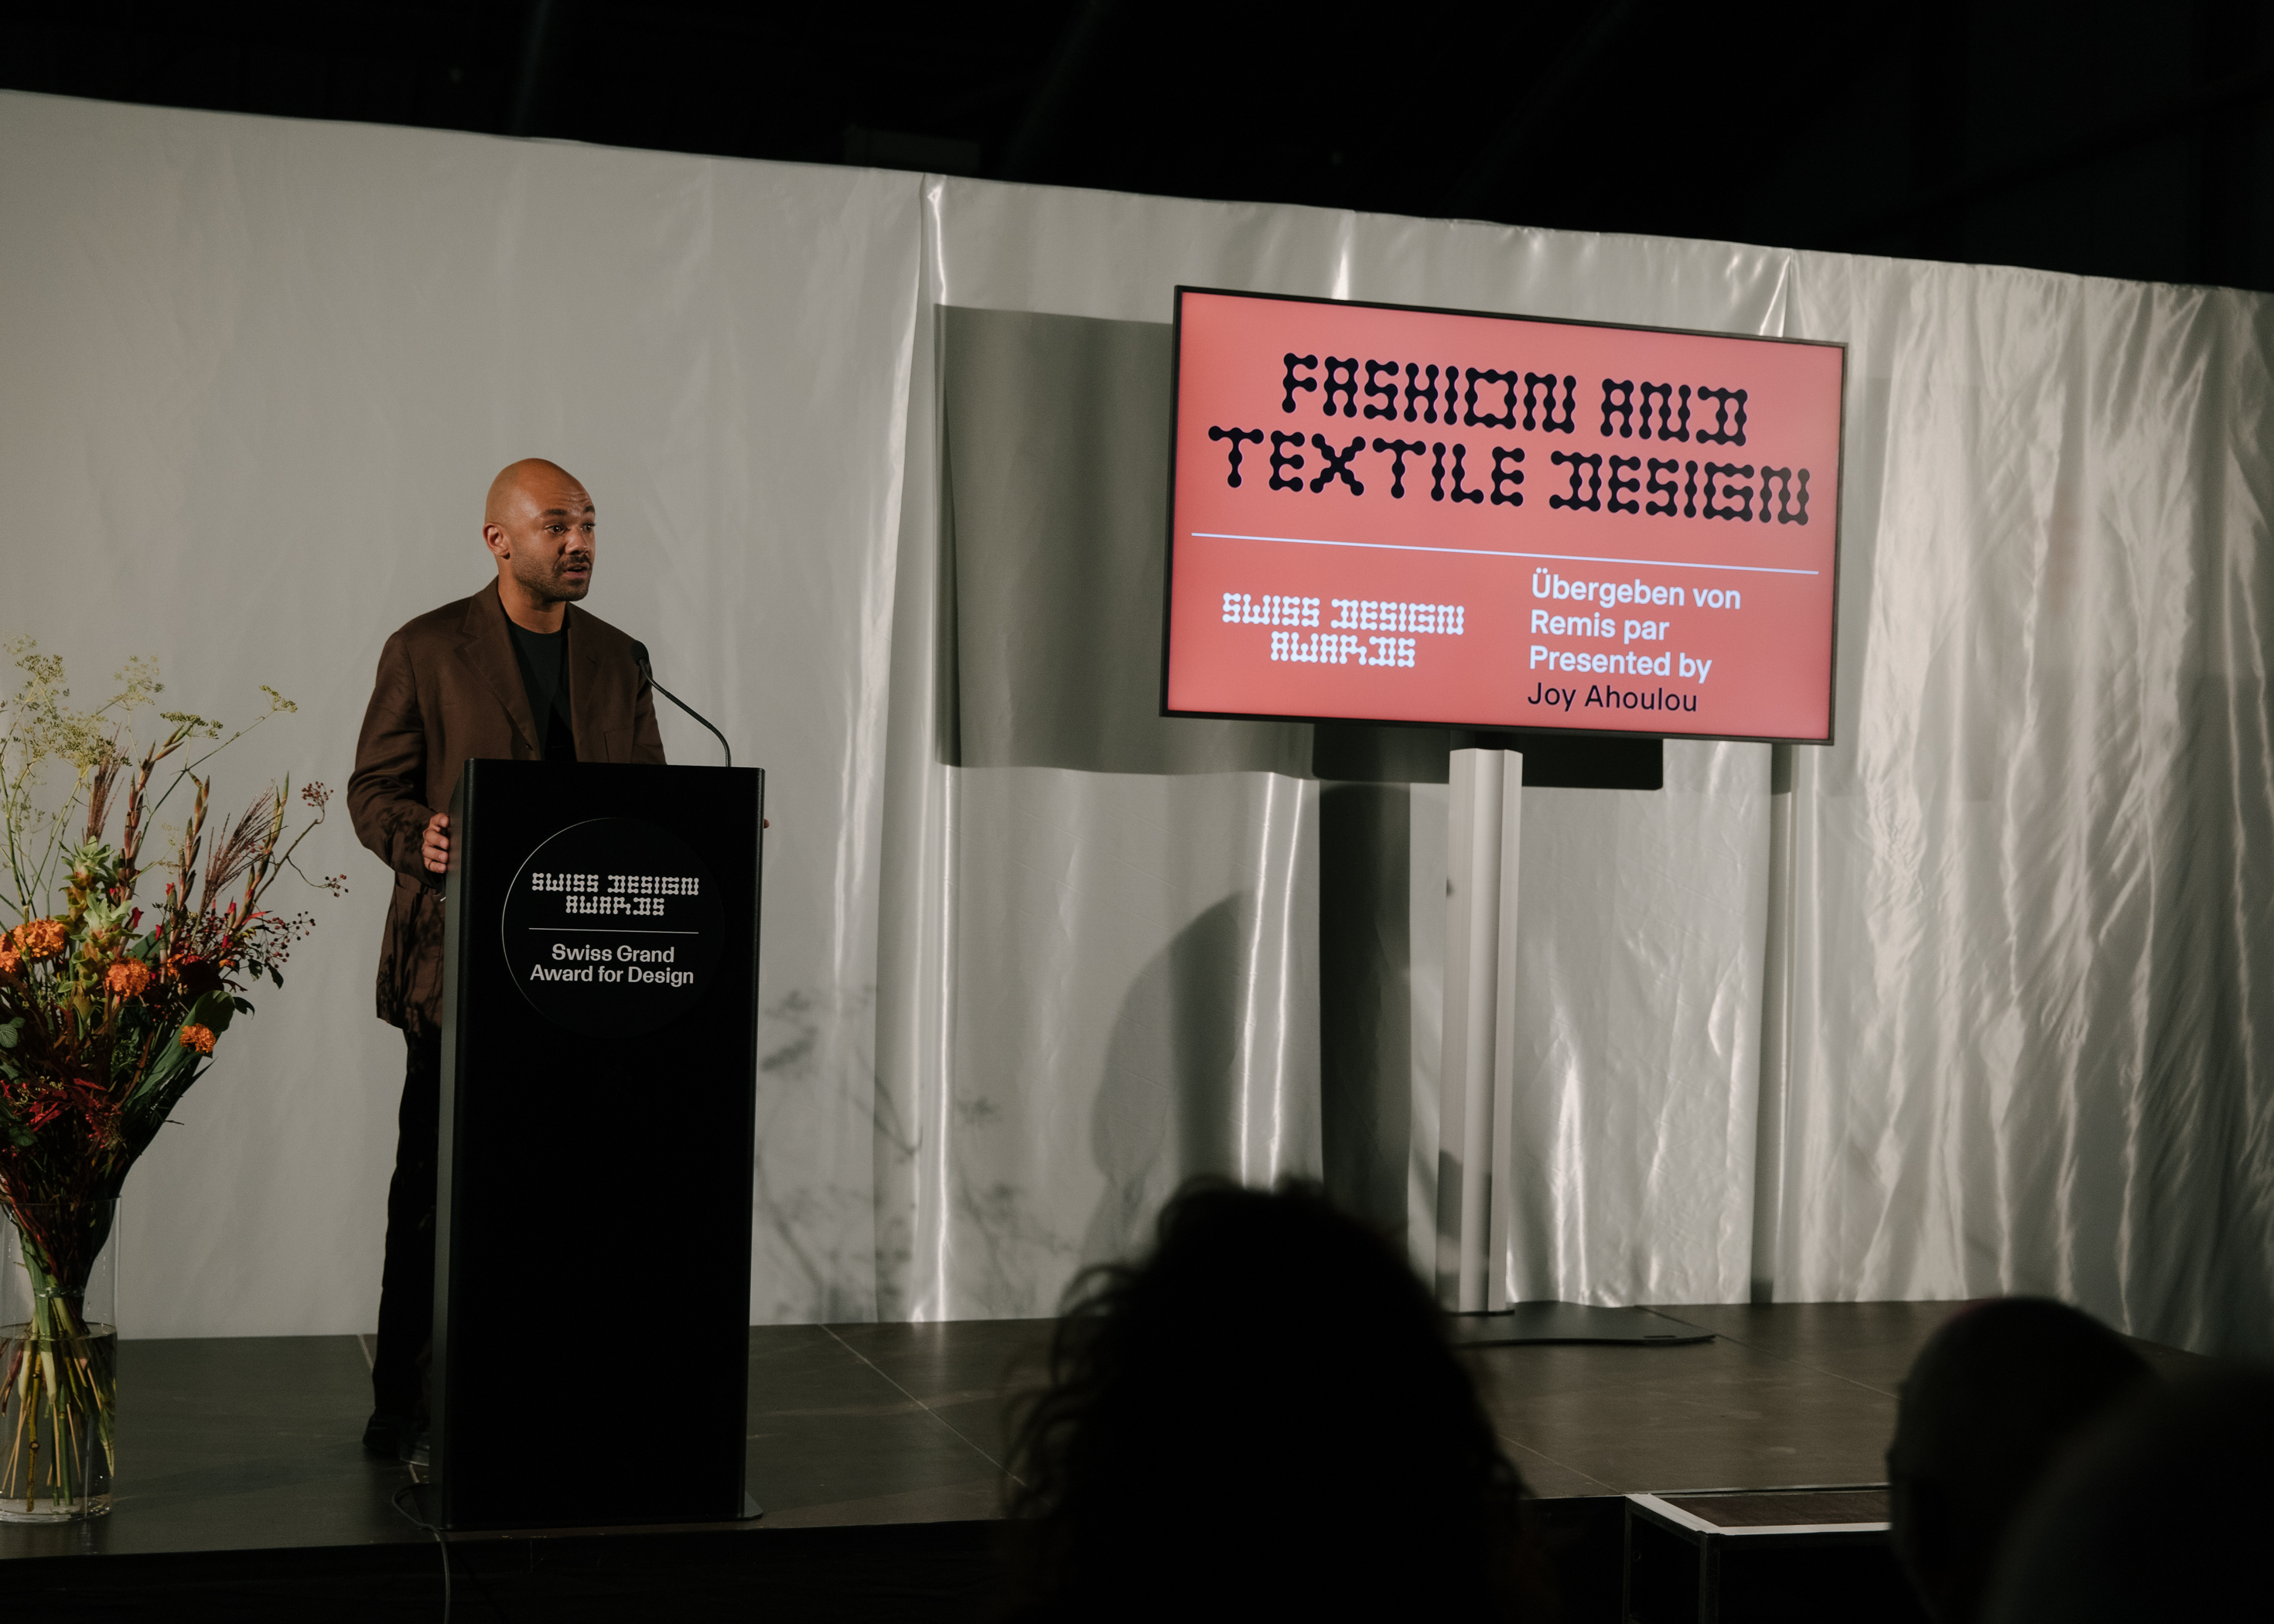 Swiss Design Awards ceremony. Joy Ahoulou presenting the winners of the Fashion and Textile Design category